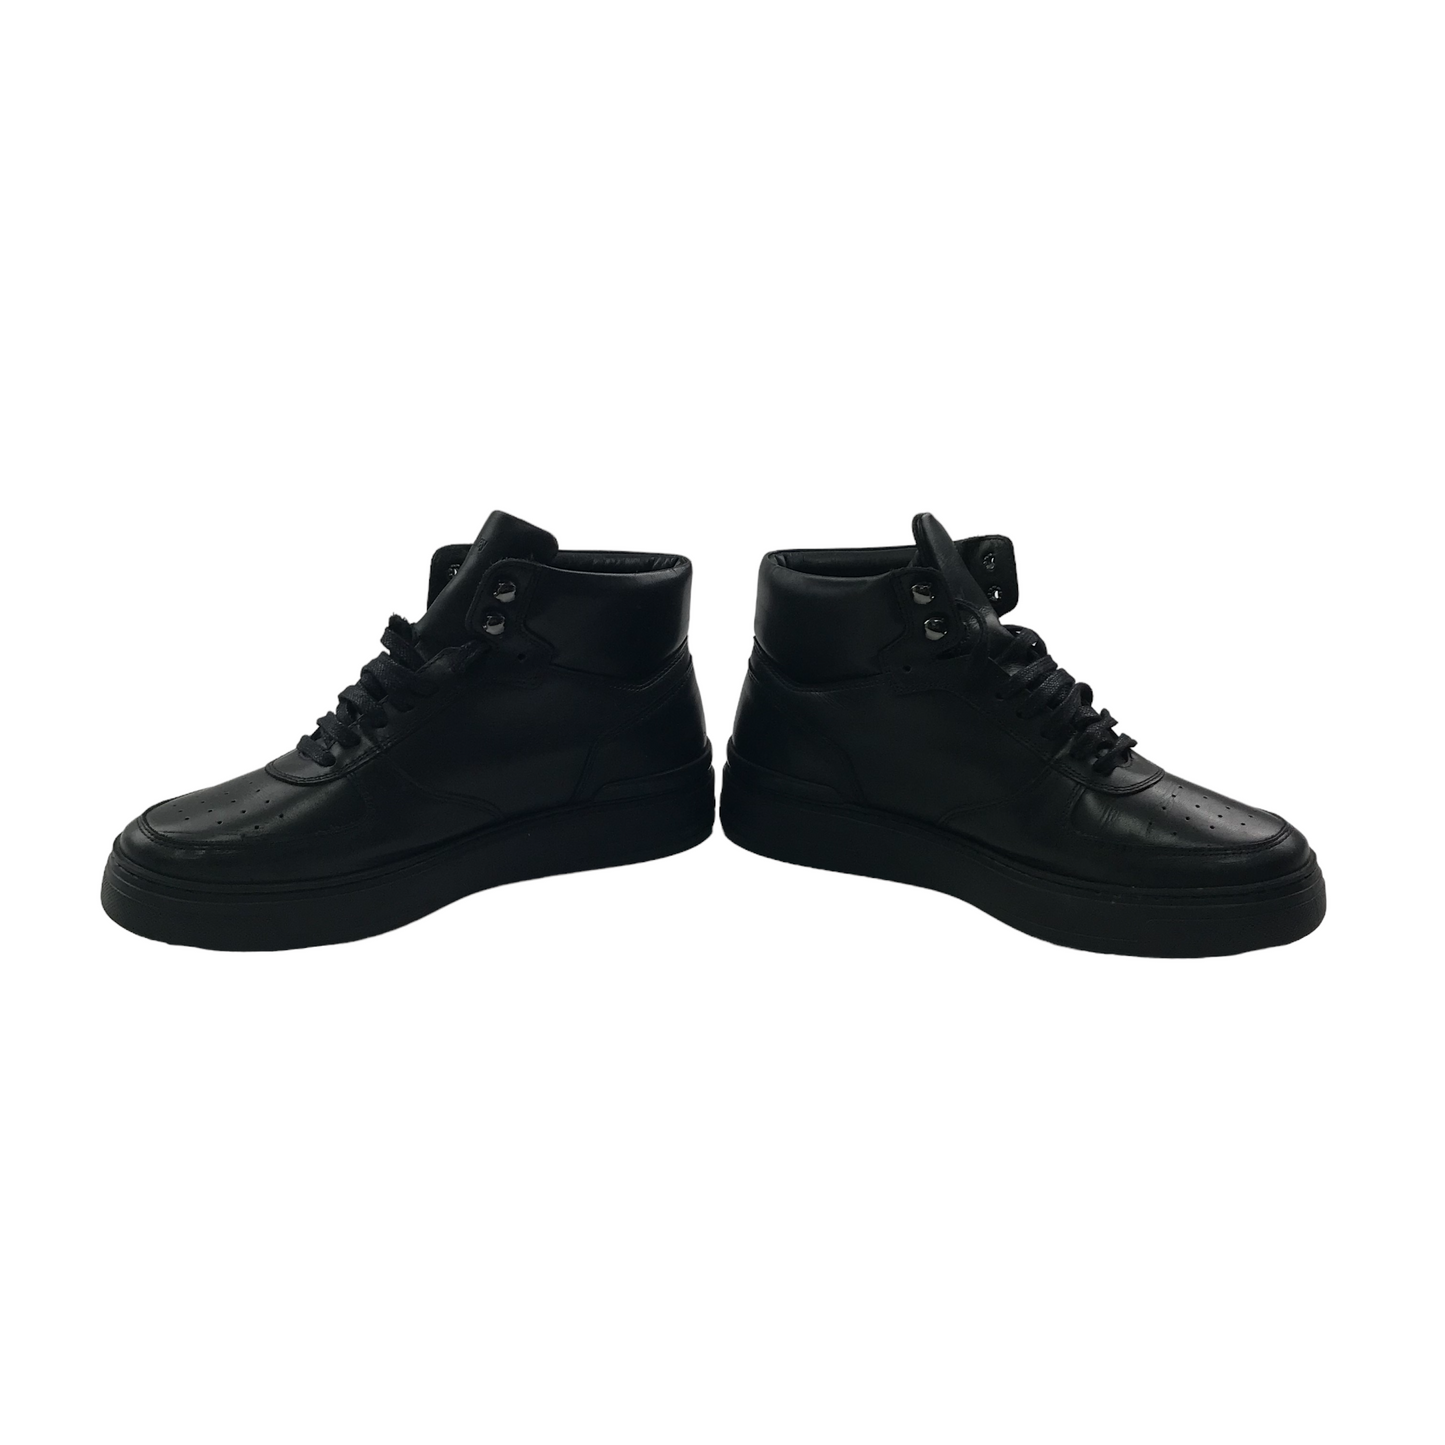 RB Black High Tops Trainers Shoe Size EUR 40